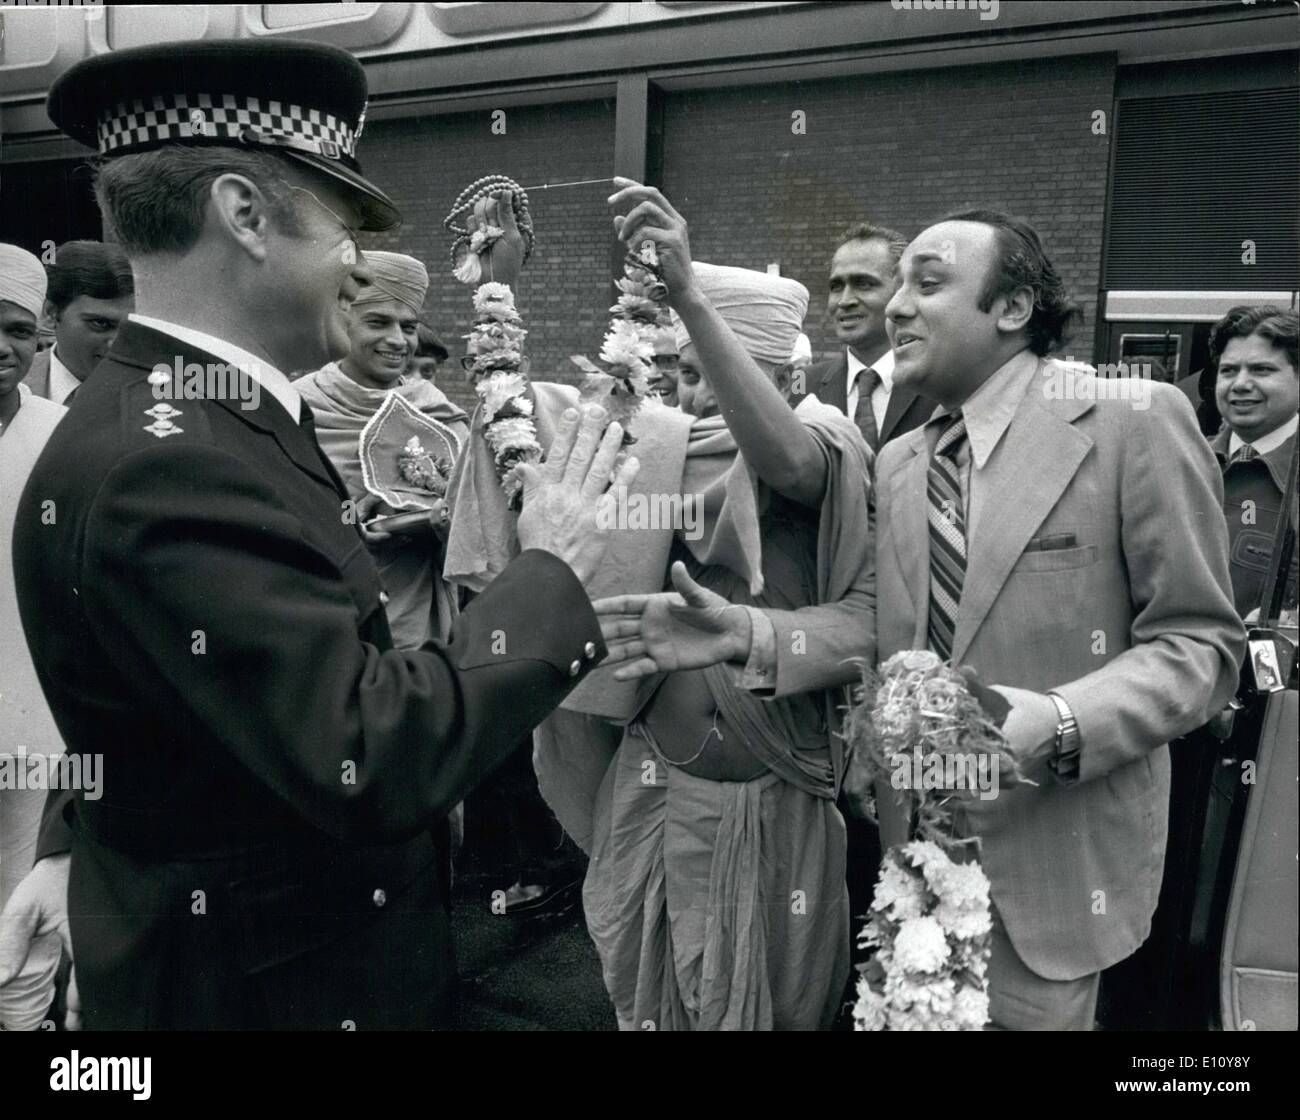 Jun. 06, 1974 - Policeman's Resistance Overcome By Hindu Flower Power: Police Inspector Rawlinson at first politely declined the offer of a garland from H.S. Divine Holiness Shree Pramukh Swami Shree Narayanswarupdasji, Spiritual head of the Shree Swaminarryan Hindu Mission, when he arrived at Heathrow on Saturday, for a tour of Britain. But then the inspector changed his mind and accepted. Stock Photo